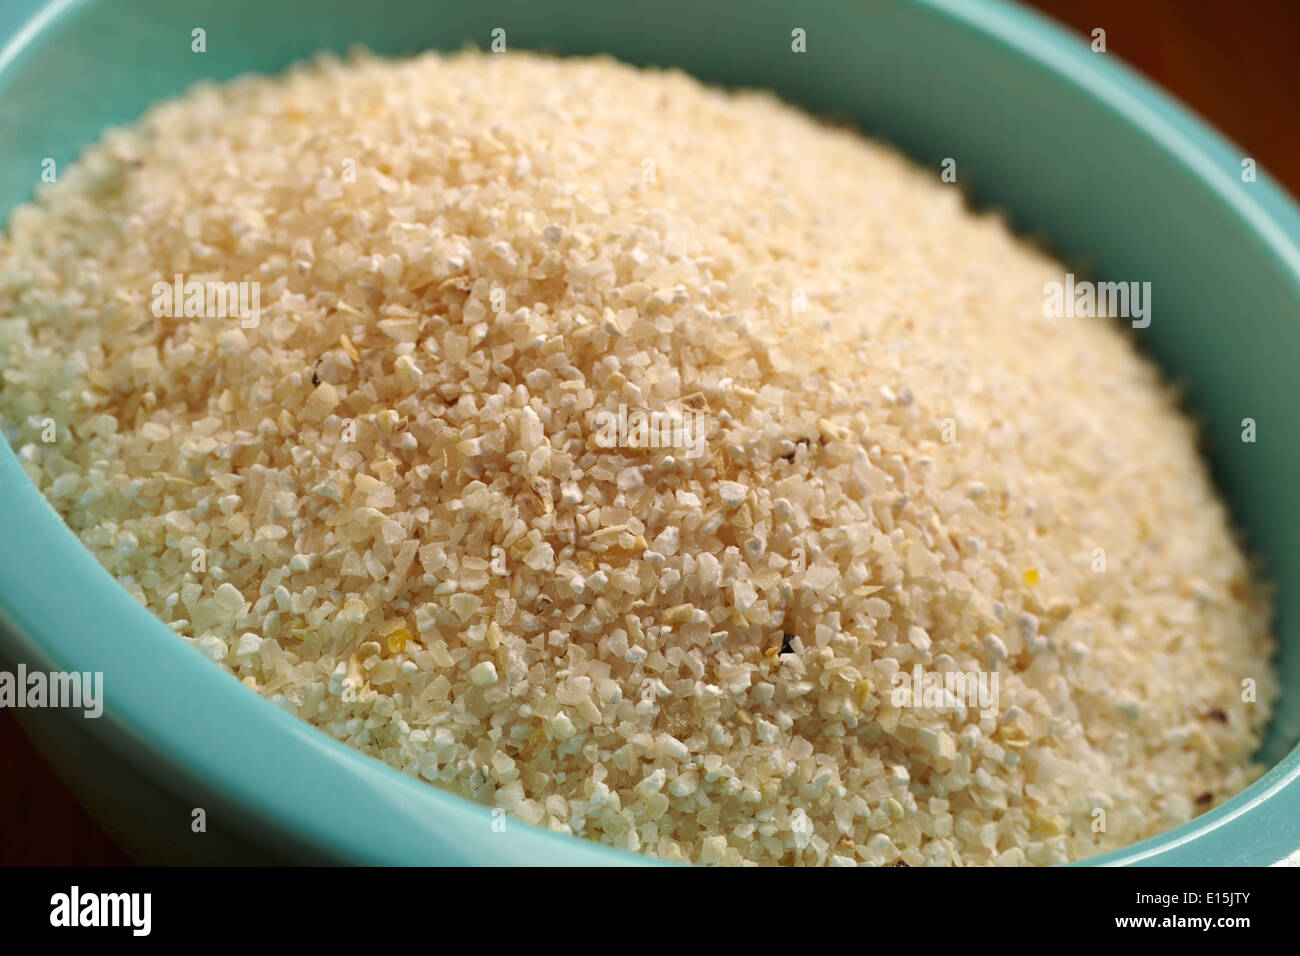 uncooked hominy grits Stock Photo